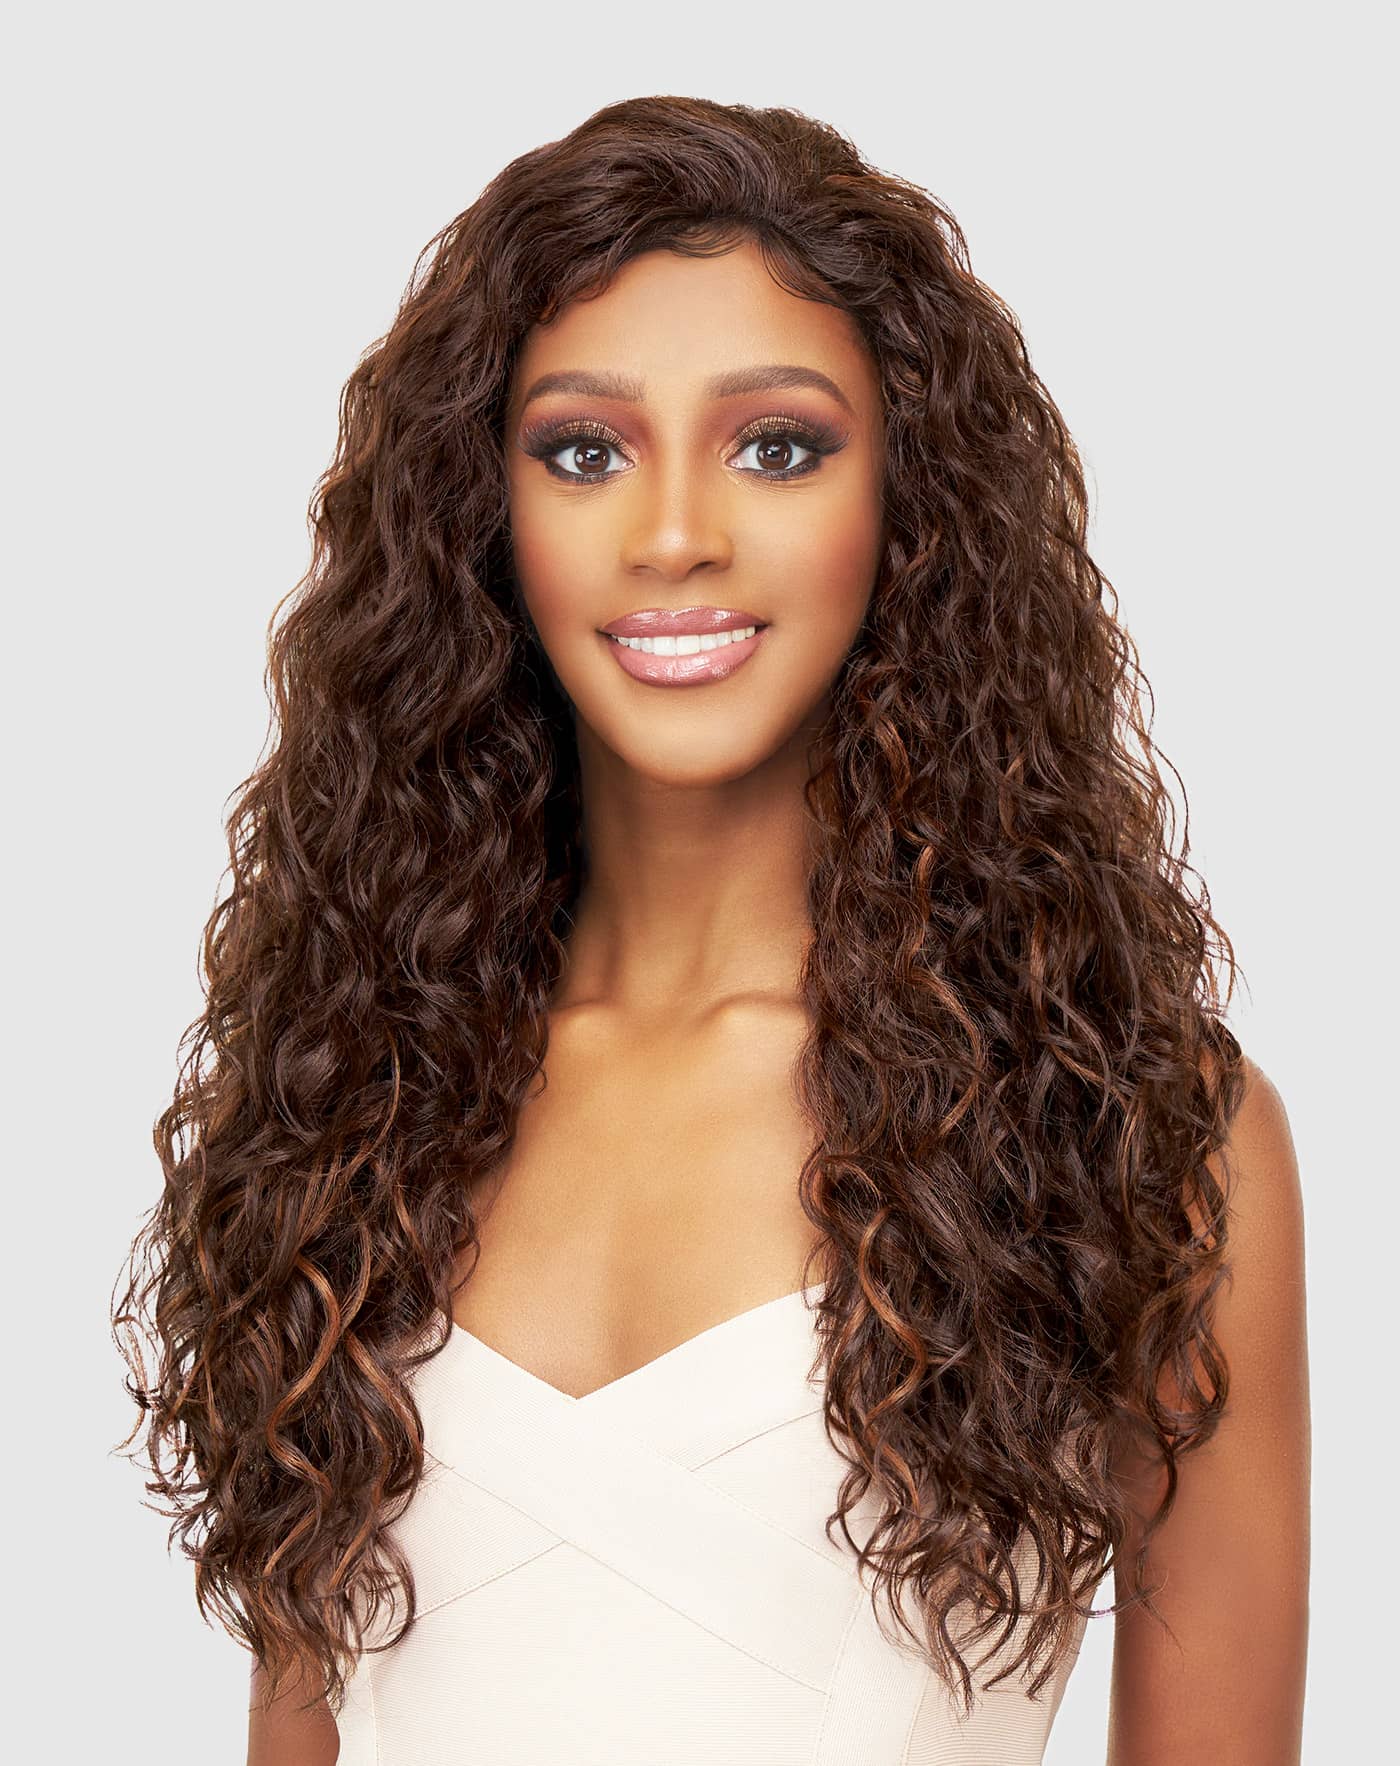 Vanessa Fashion Wig Synthetic Hair Full Wig BARBIE